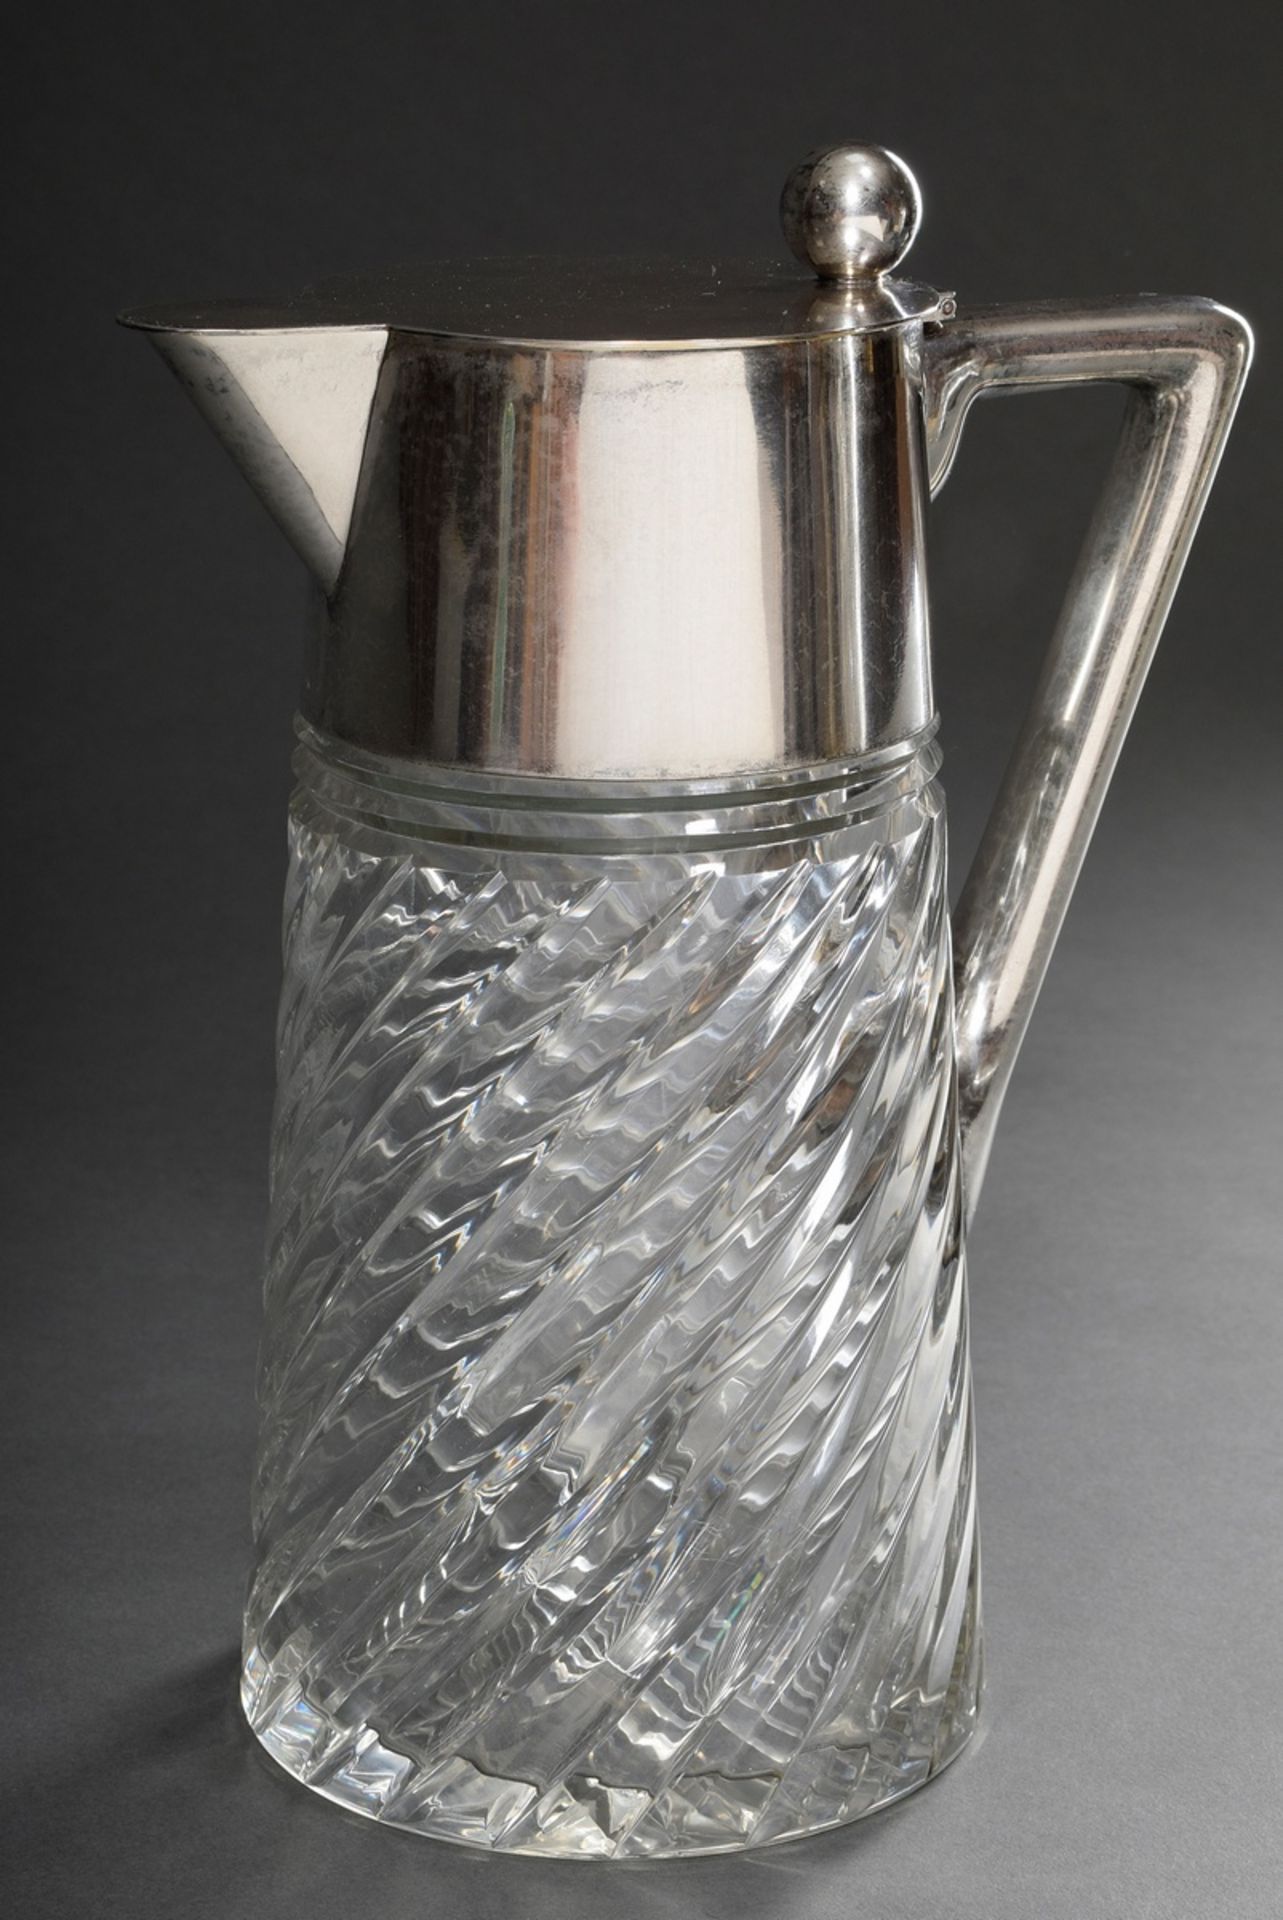 Large crystal juice jug "Kalte Ente" (Cold Duck) with silver 800 mounting and grooved wall, Wilkens